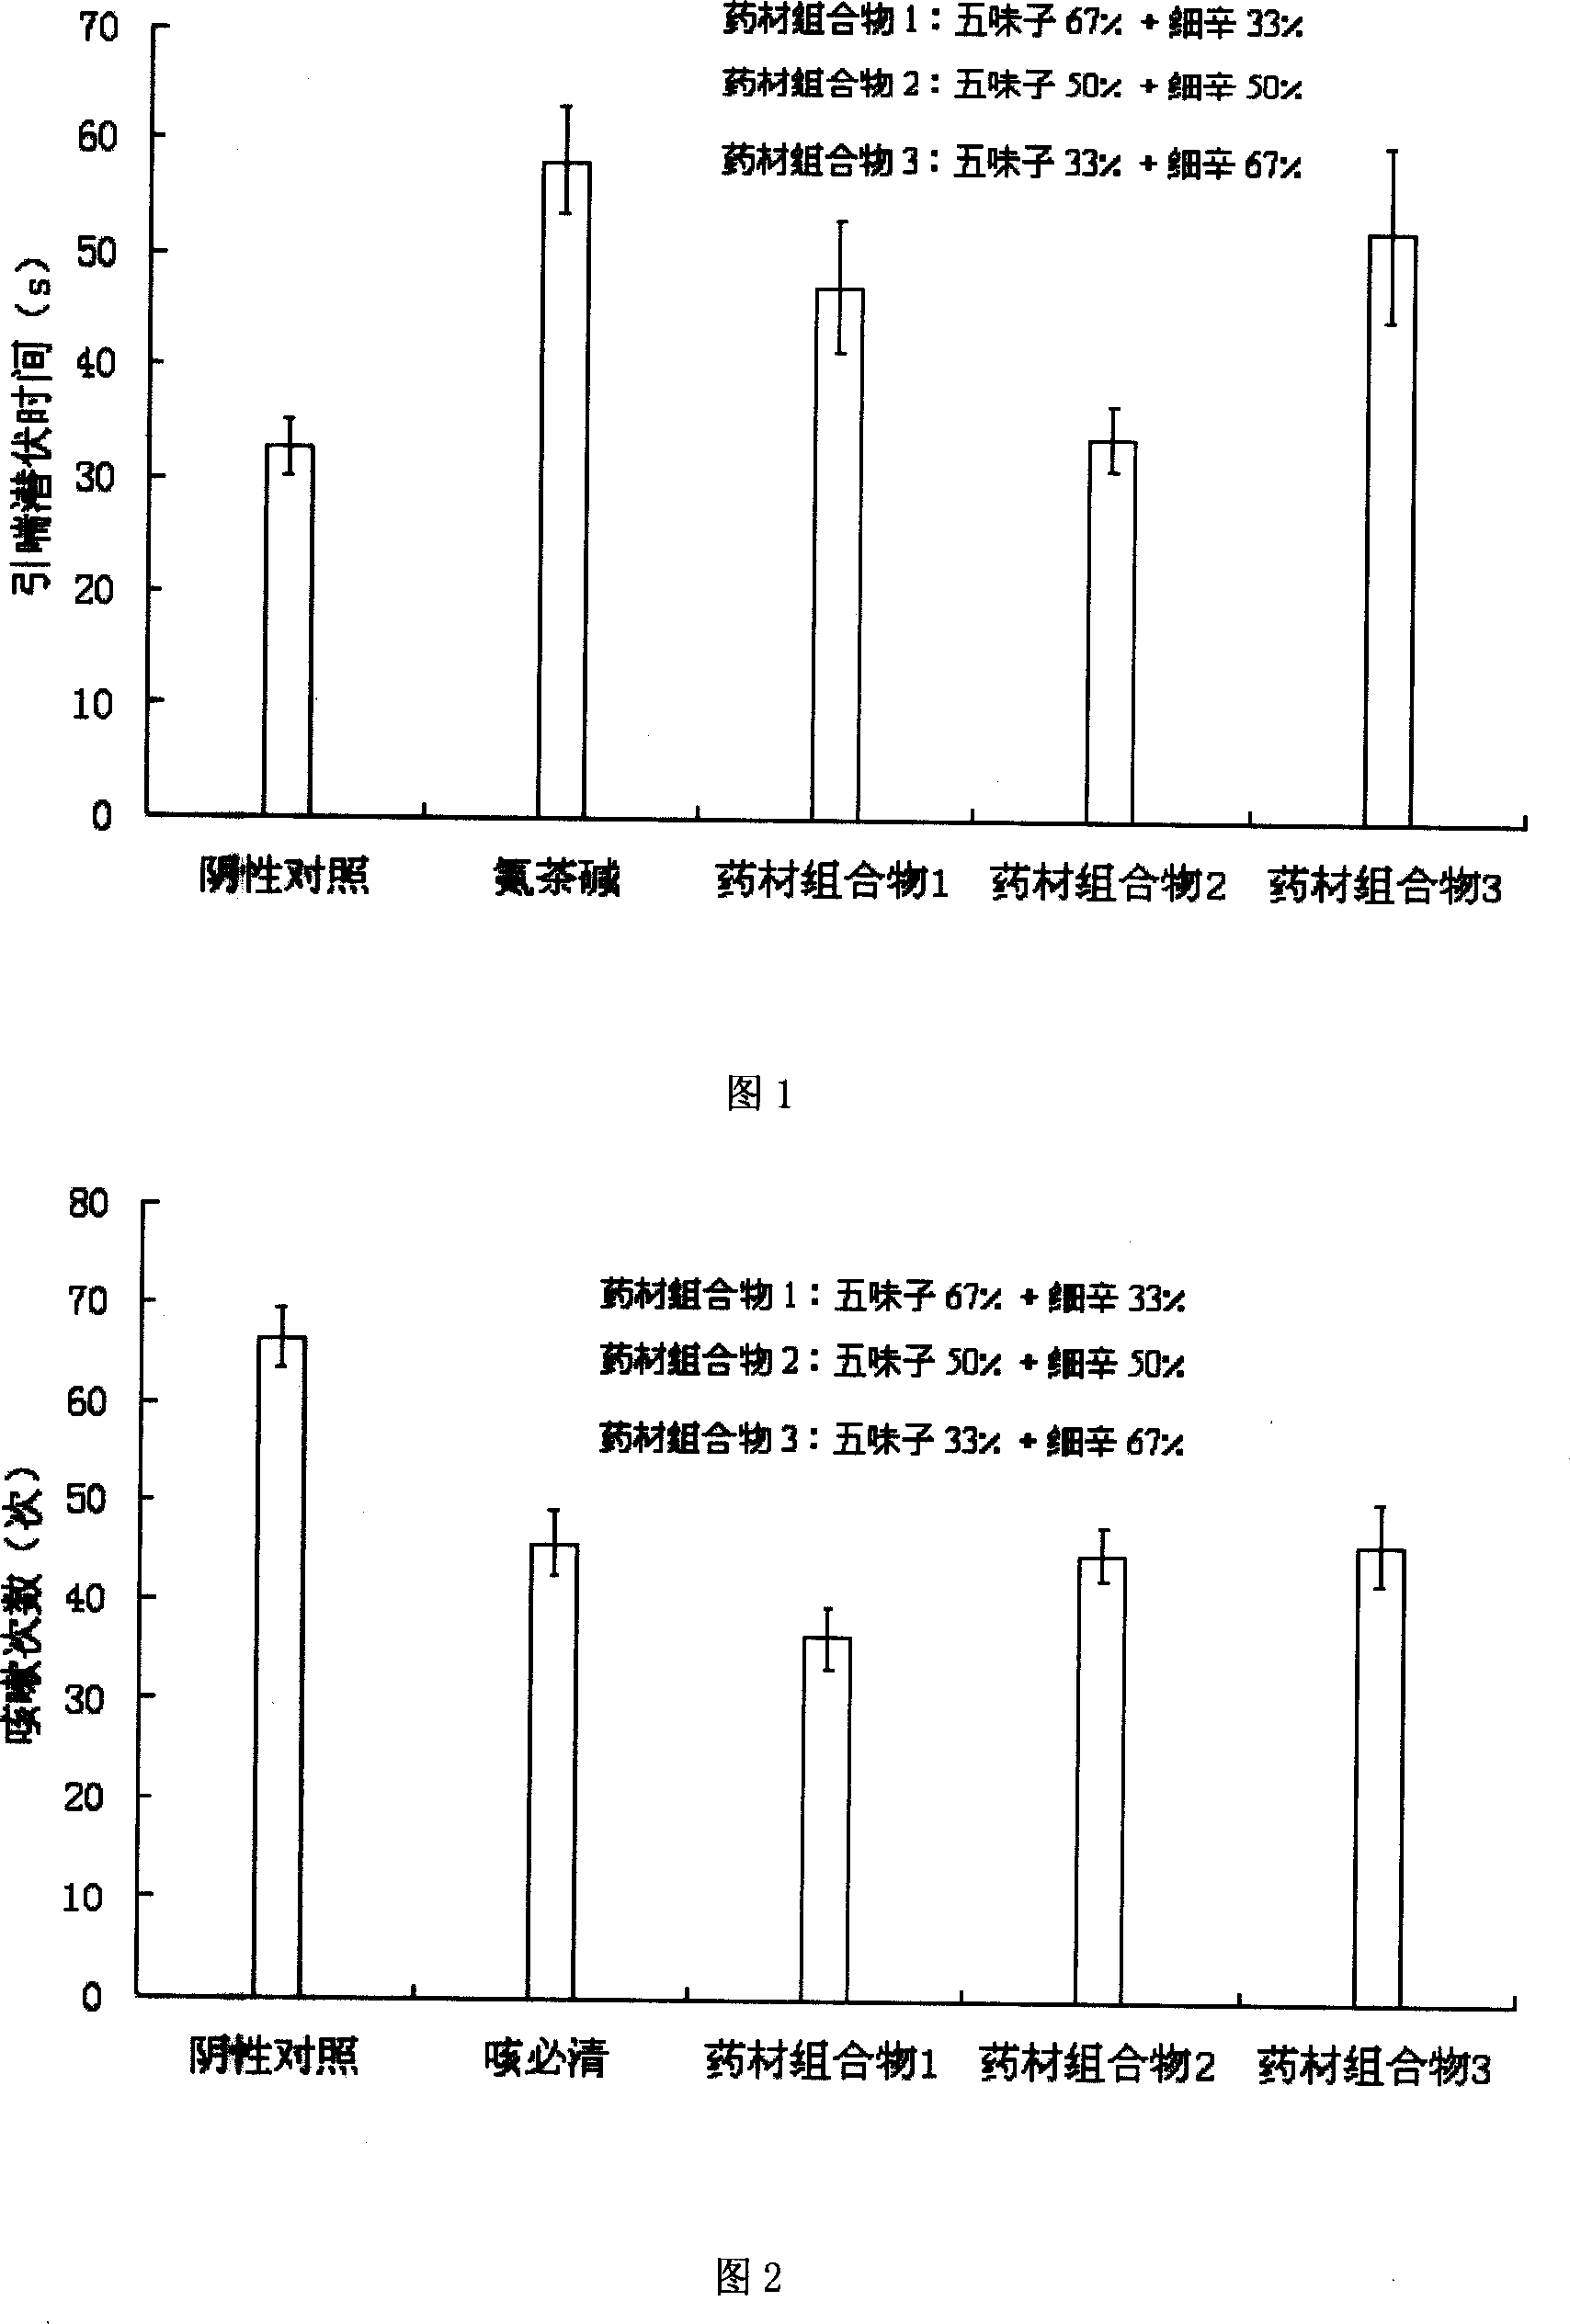 Composition of schisandra fruit and asarum for treating asthma and preparing process thereof